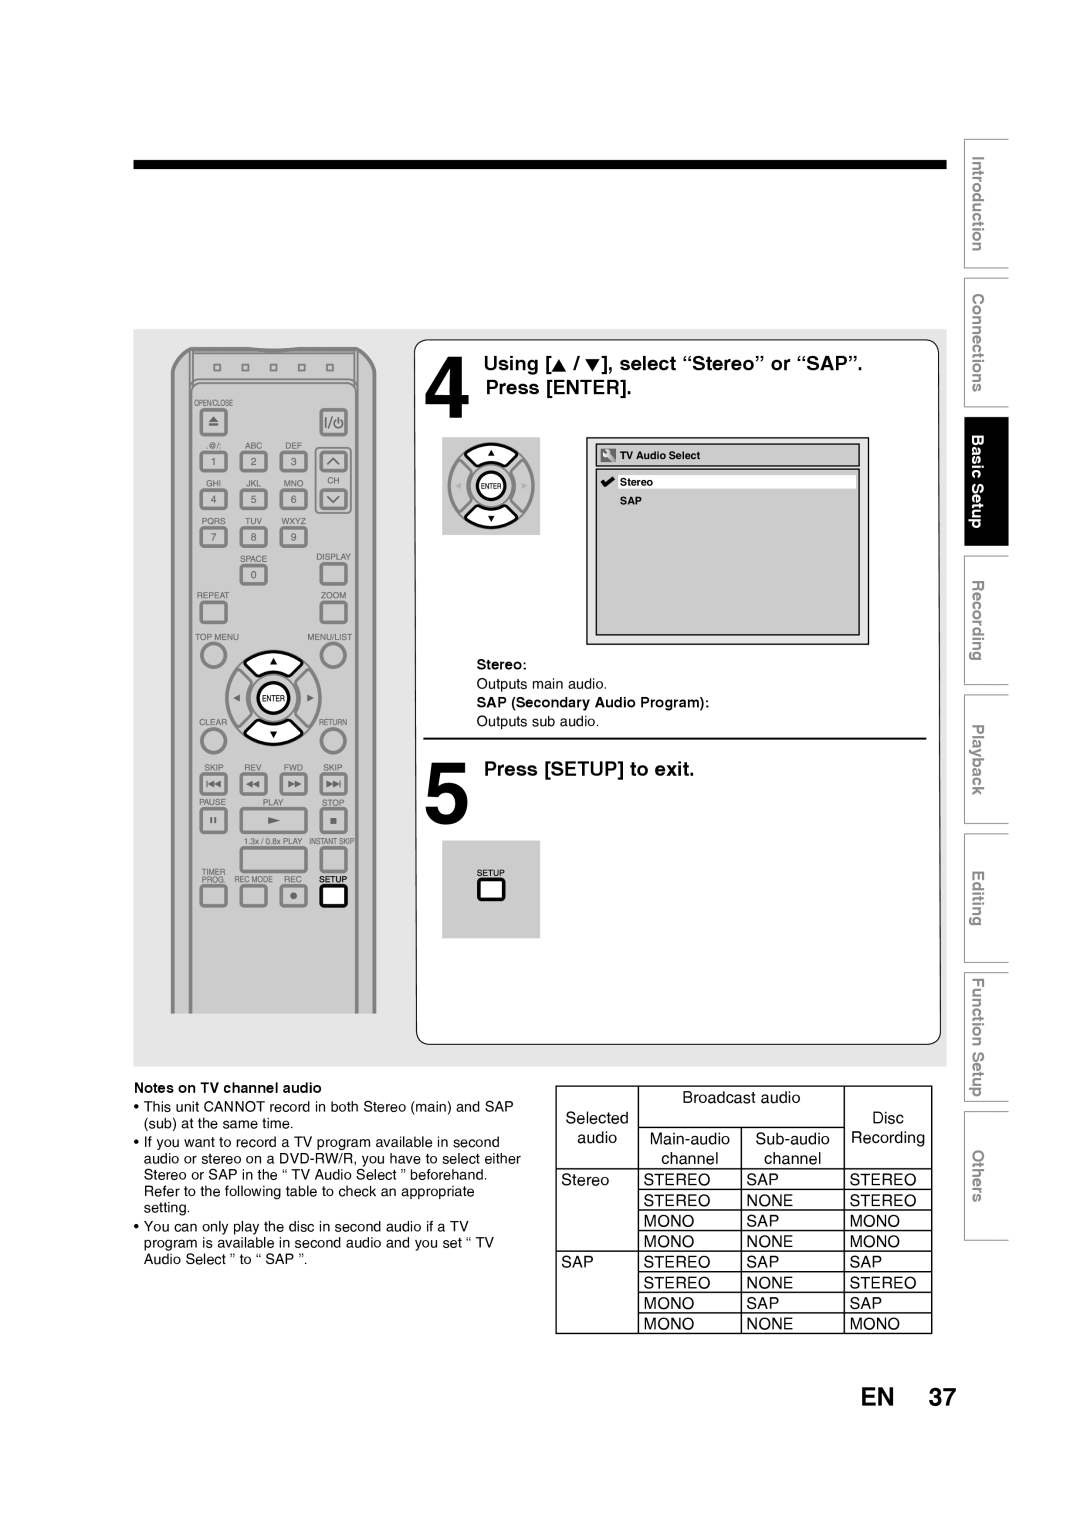 Toshiba D-RW2SU/D-RW2SC Using K / L, select “Stereo” or “SAP” Press ENTER, Press SETUP to exit, Notes on TV channel audio 